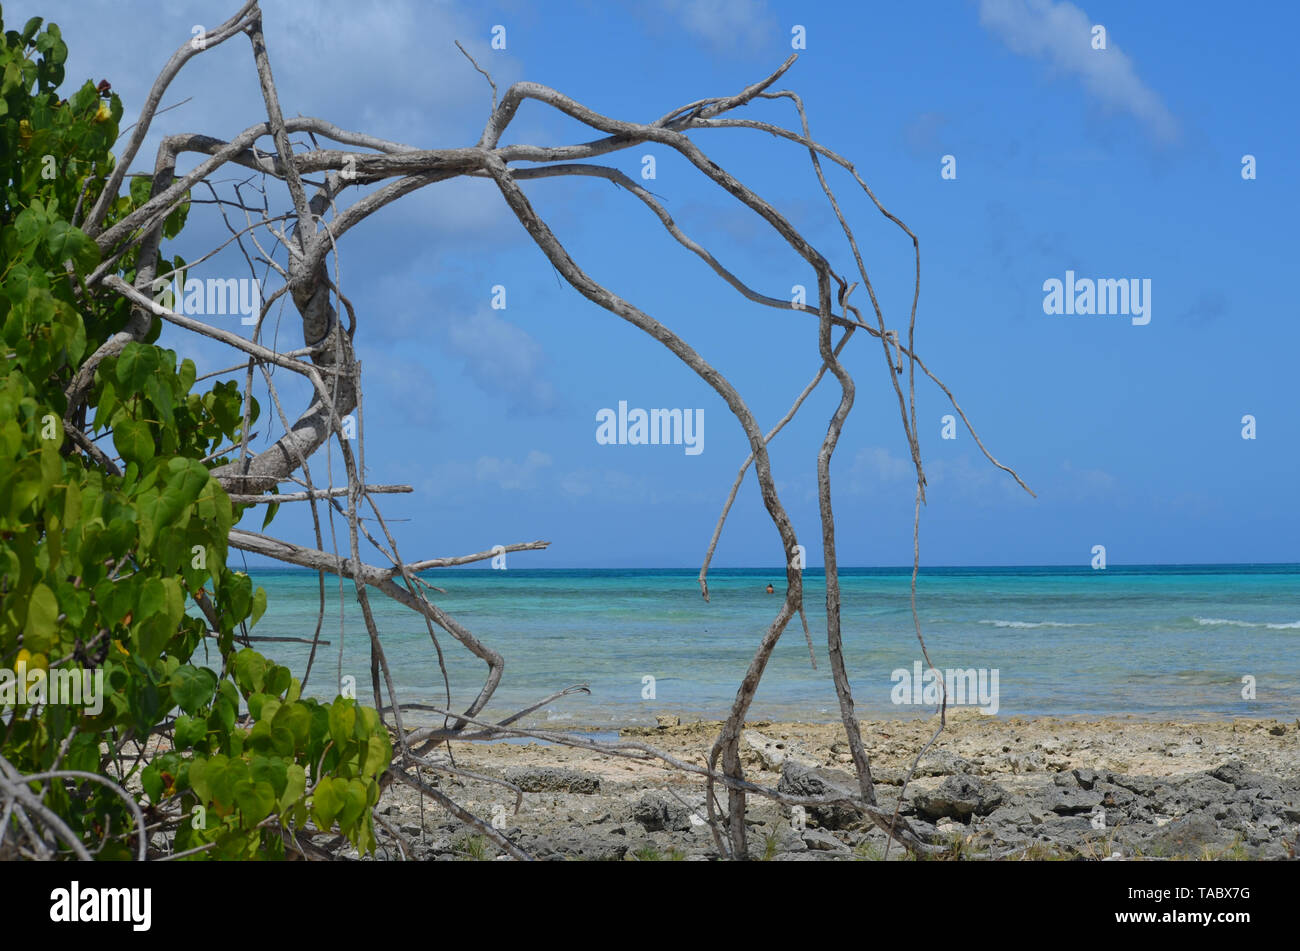 Guardalavaca beach in Southern Cuba, currently threatened by an unsustainable massive tourism model Stock Photo